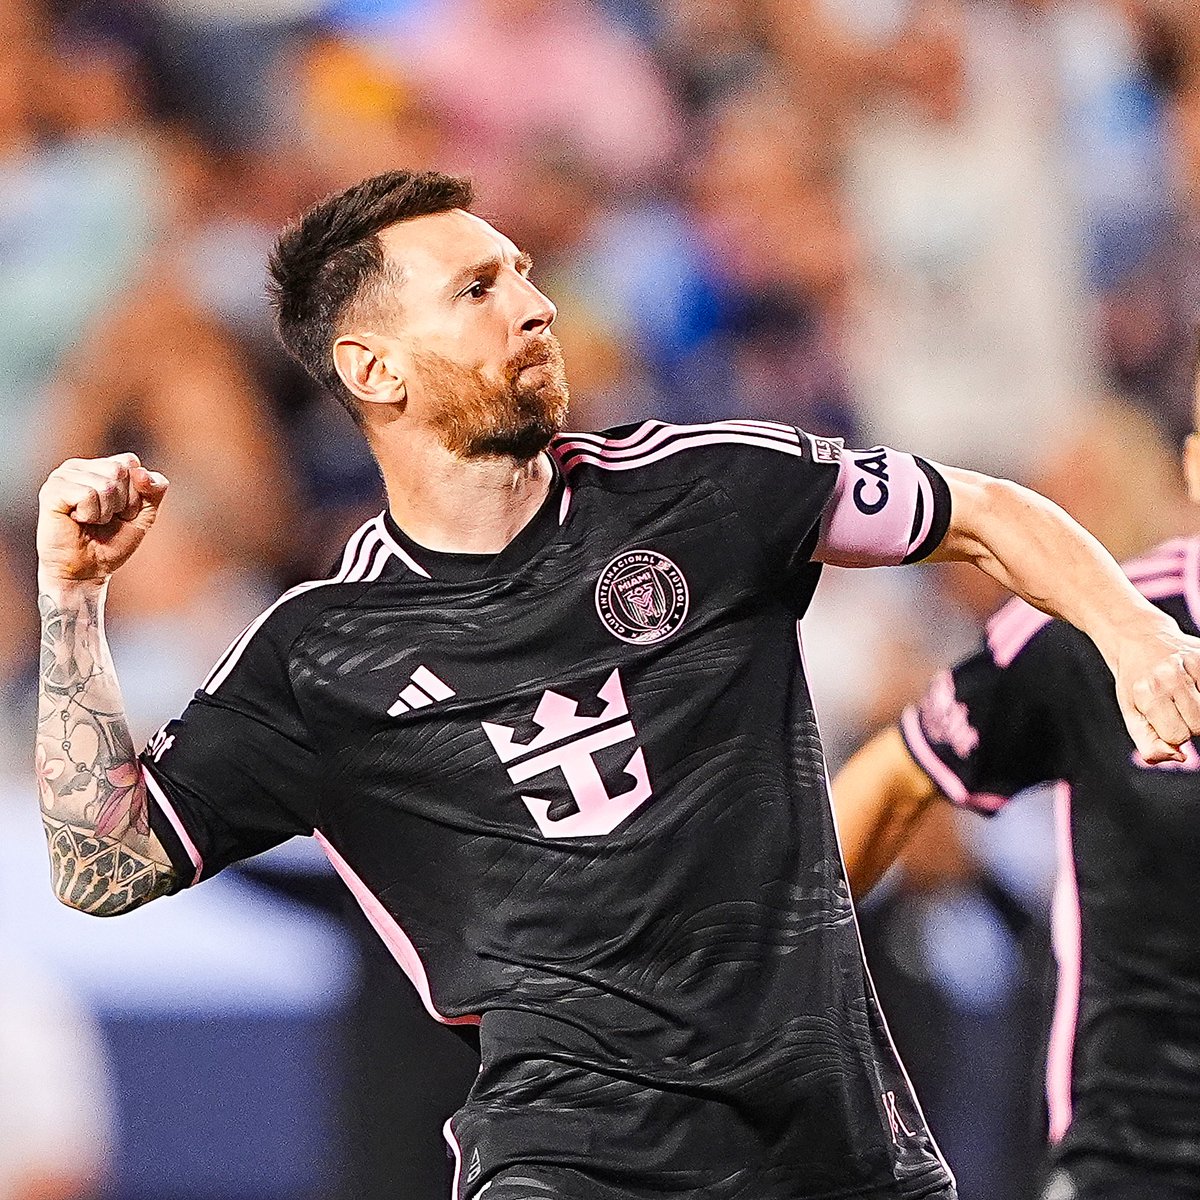 ⚽️🅰️ Another goal and assist for Lionel Messi last night, as his banger helped Inter Miami to a 3-2 victory over Kansas! 👉 5th MLS goal this season 👉 7th total goal this season 👉 18th total goal for Inter Miami 👉 94th open play outside box goal 👉 722nd all time club goal 👉…